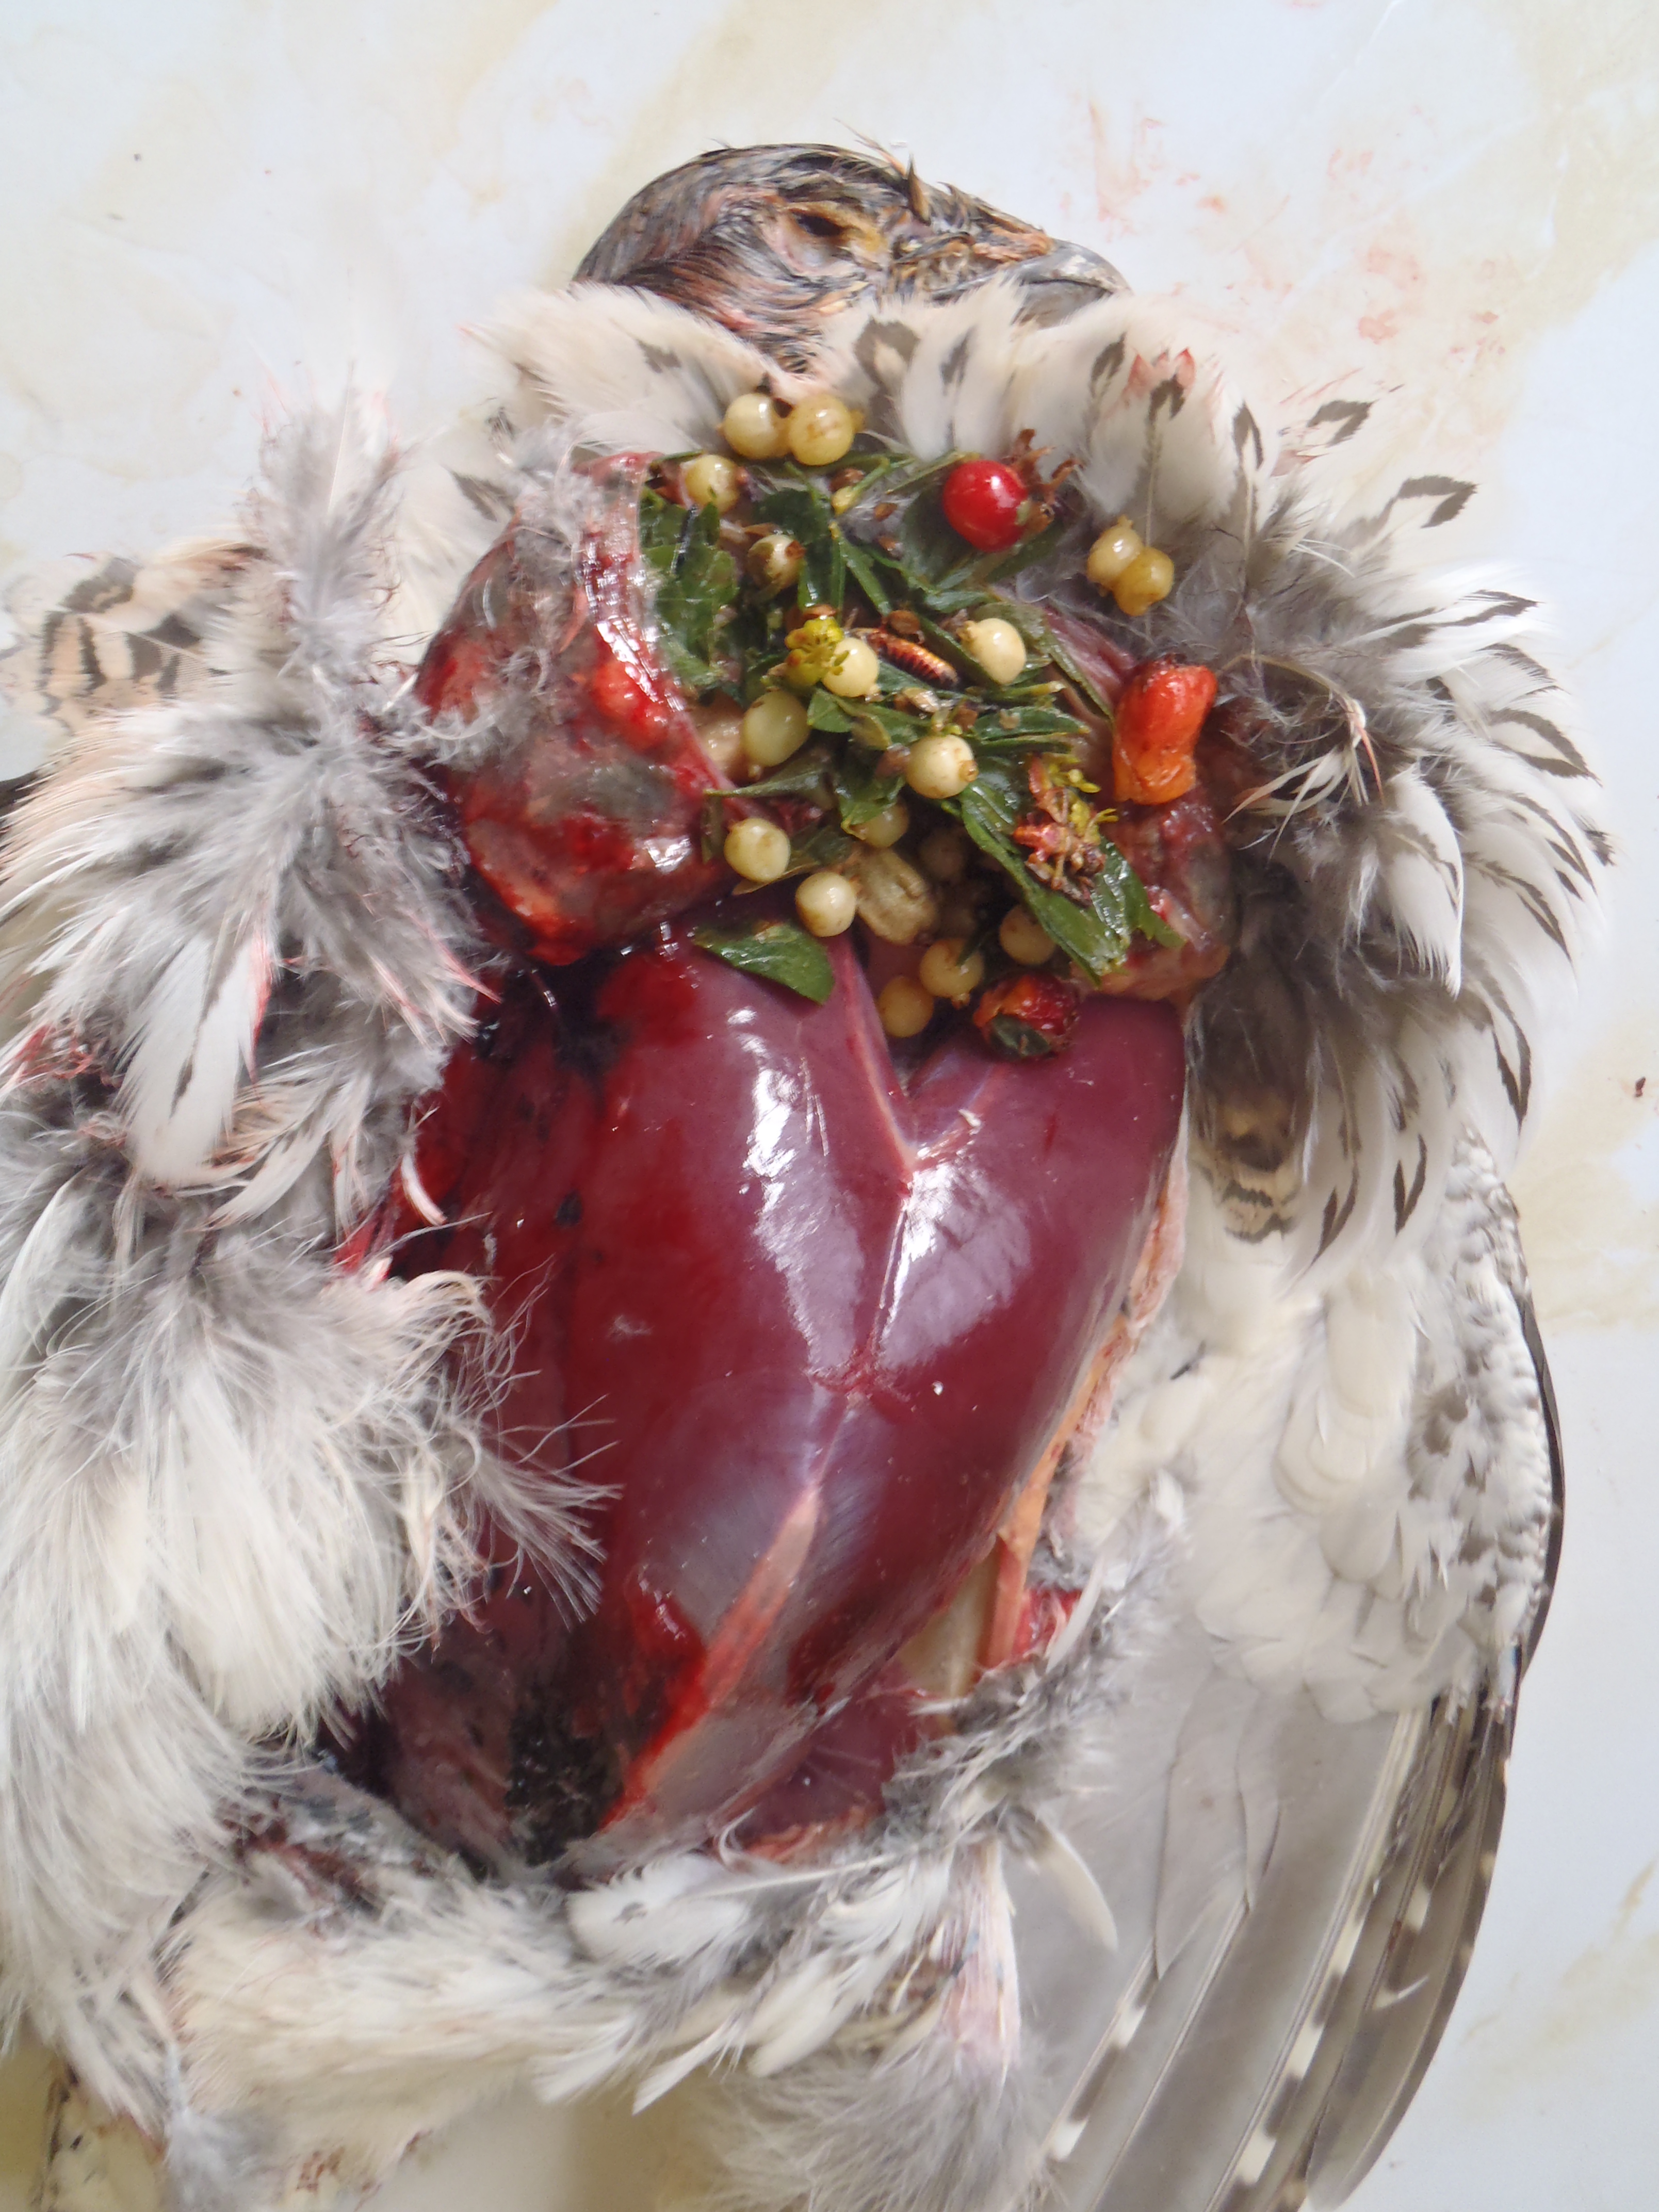 The breast and ruptured crop of a grouse